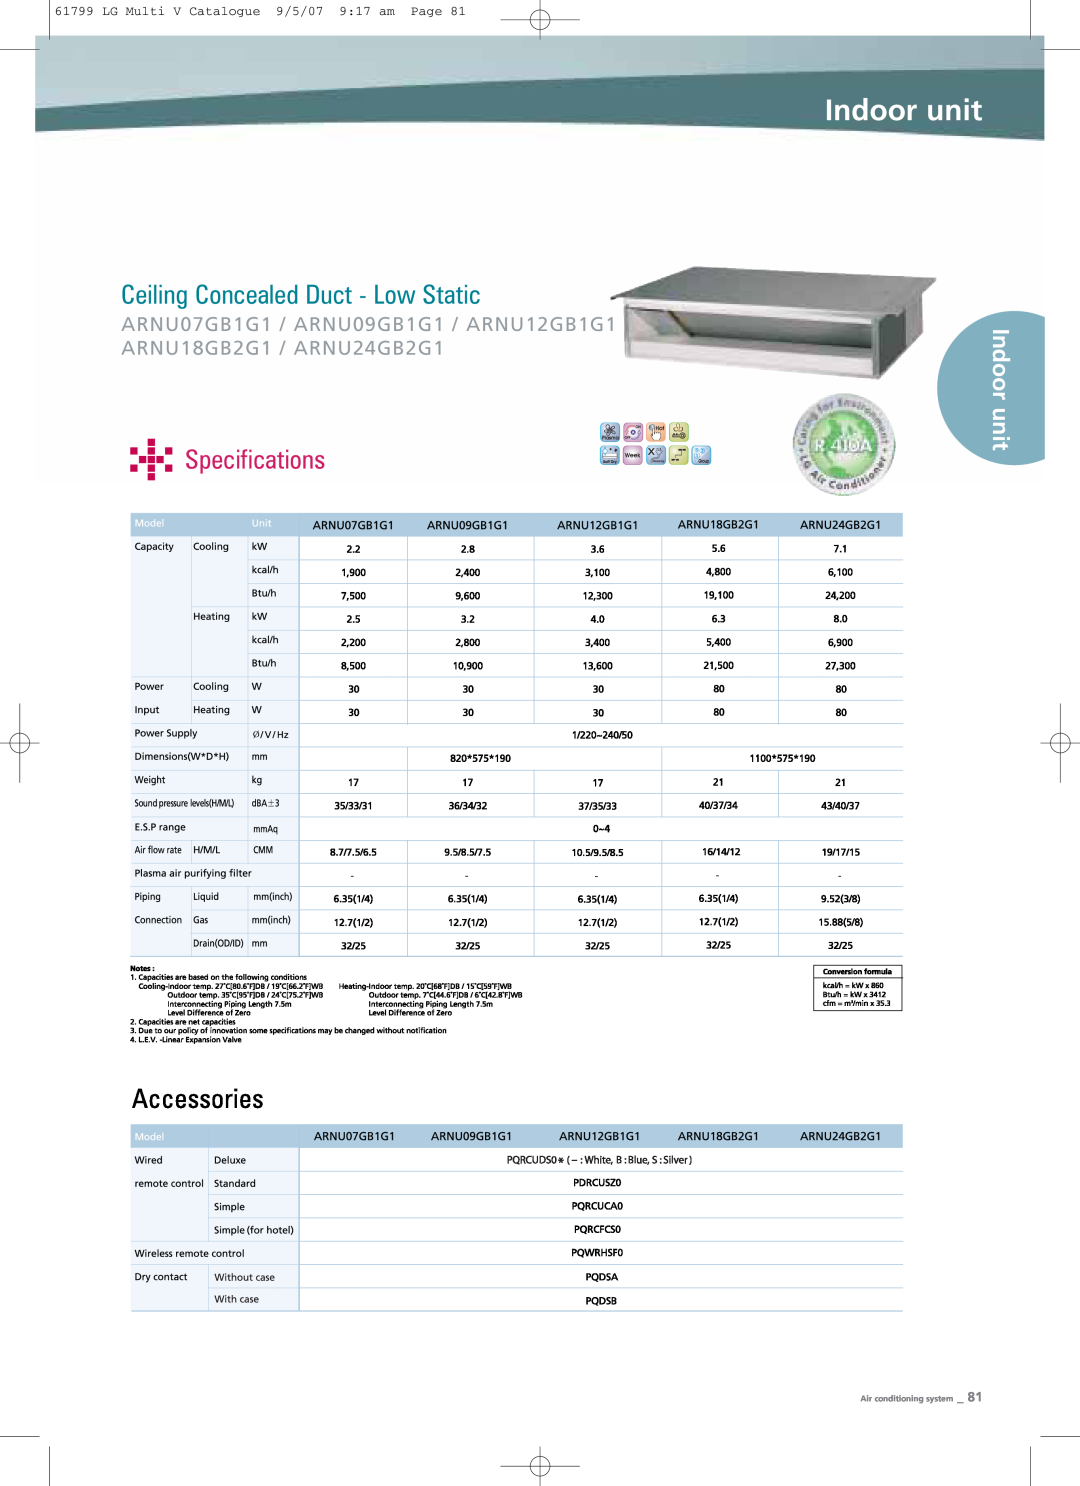 LG Electronics PRHR040 Ceiling Concealed Duct - Low Static, Indoor unit, unit Specifications, Air conditioning system 